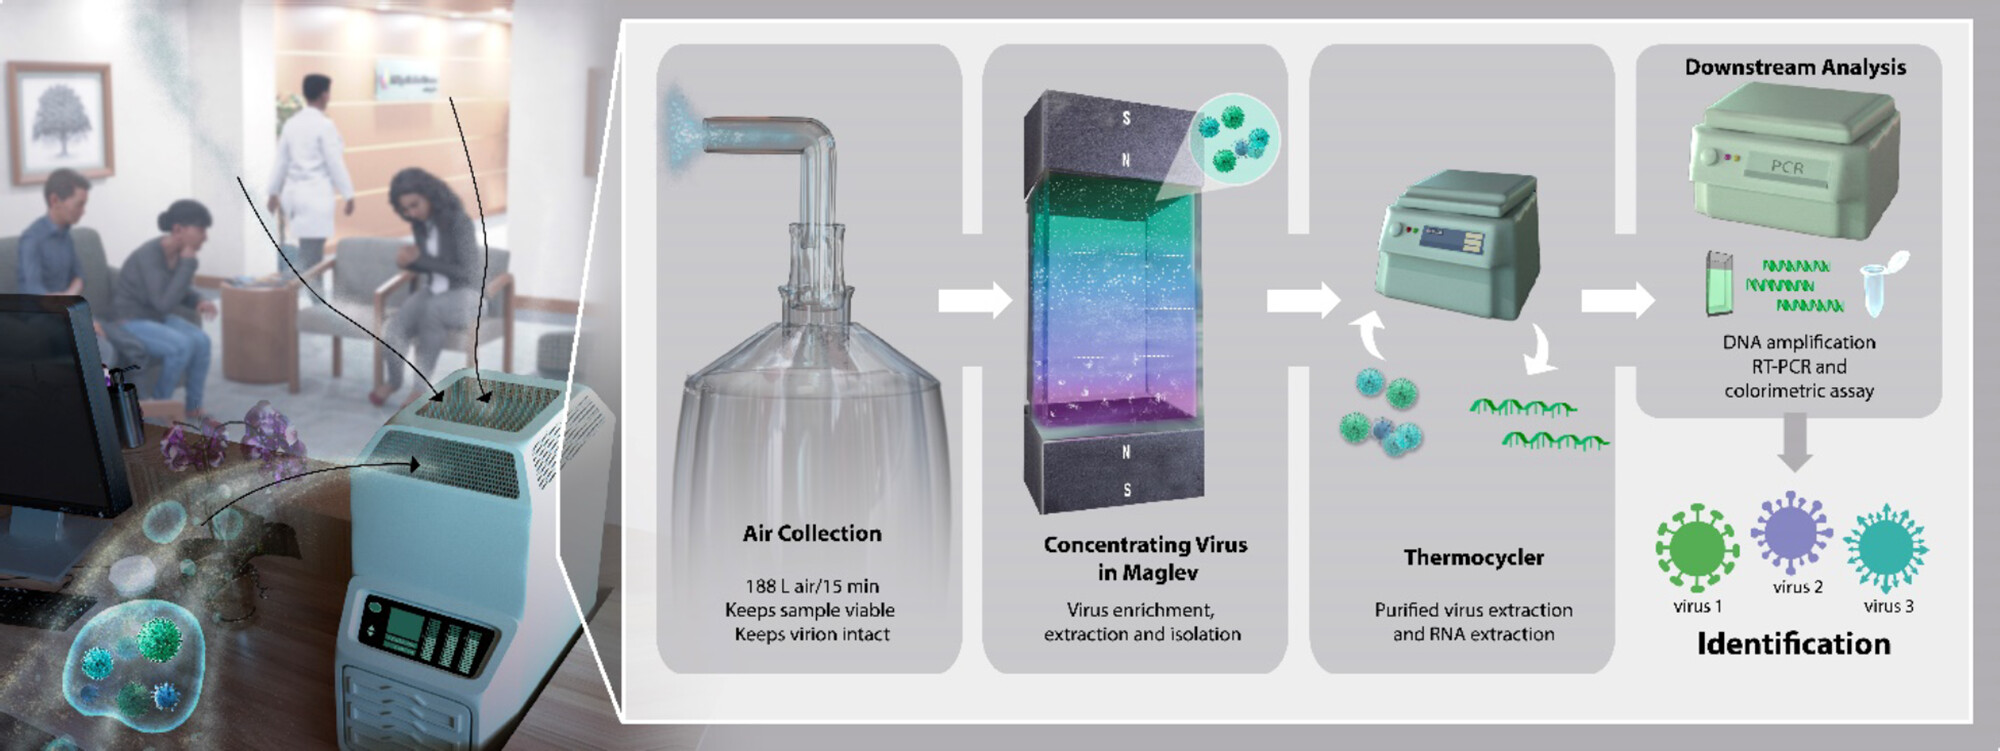 A schematic with five panels shows the proposed operation of a new early-detection system for airborne viruses. The first panel shows illustrated viruses entering a small machine in a doctor’s office. The next panel shows the bag inside the machine used for air collection. The air from the bag is then injected into a fluid chamber where viruses are isolated and concentrated using magnetic levitation. In the next step, the purified viruses are heated and cooled, or thermocycled, to extract DNA or RNA. The final step is identifying the virus by its genetic code using a technique like polymerase chain reaction, or PCR.